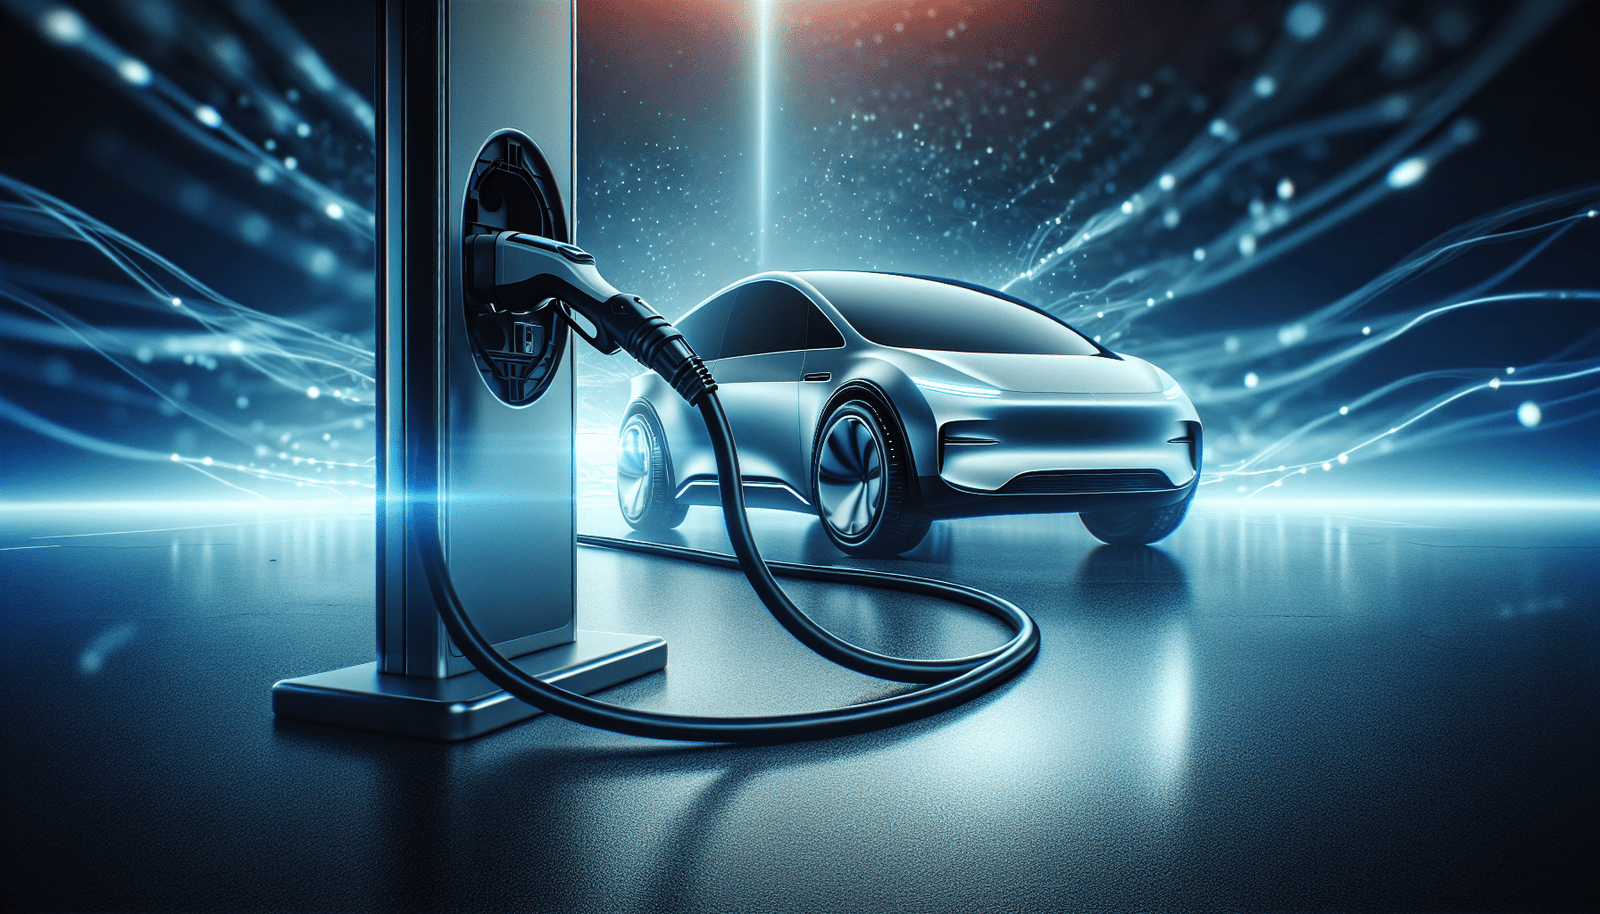 What Are The Latest Developments In Electric Vehicle Charging Speeds?